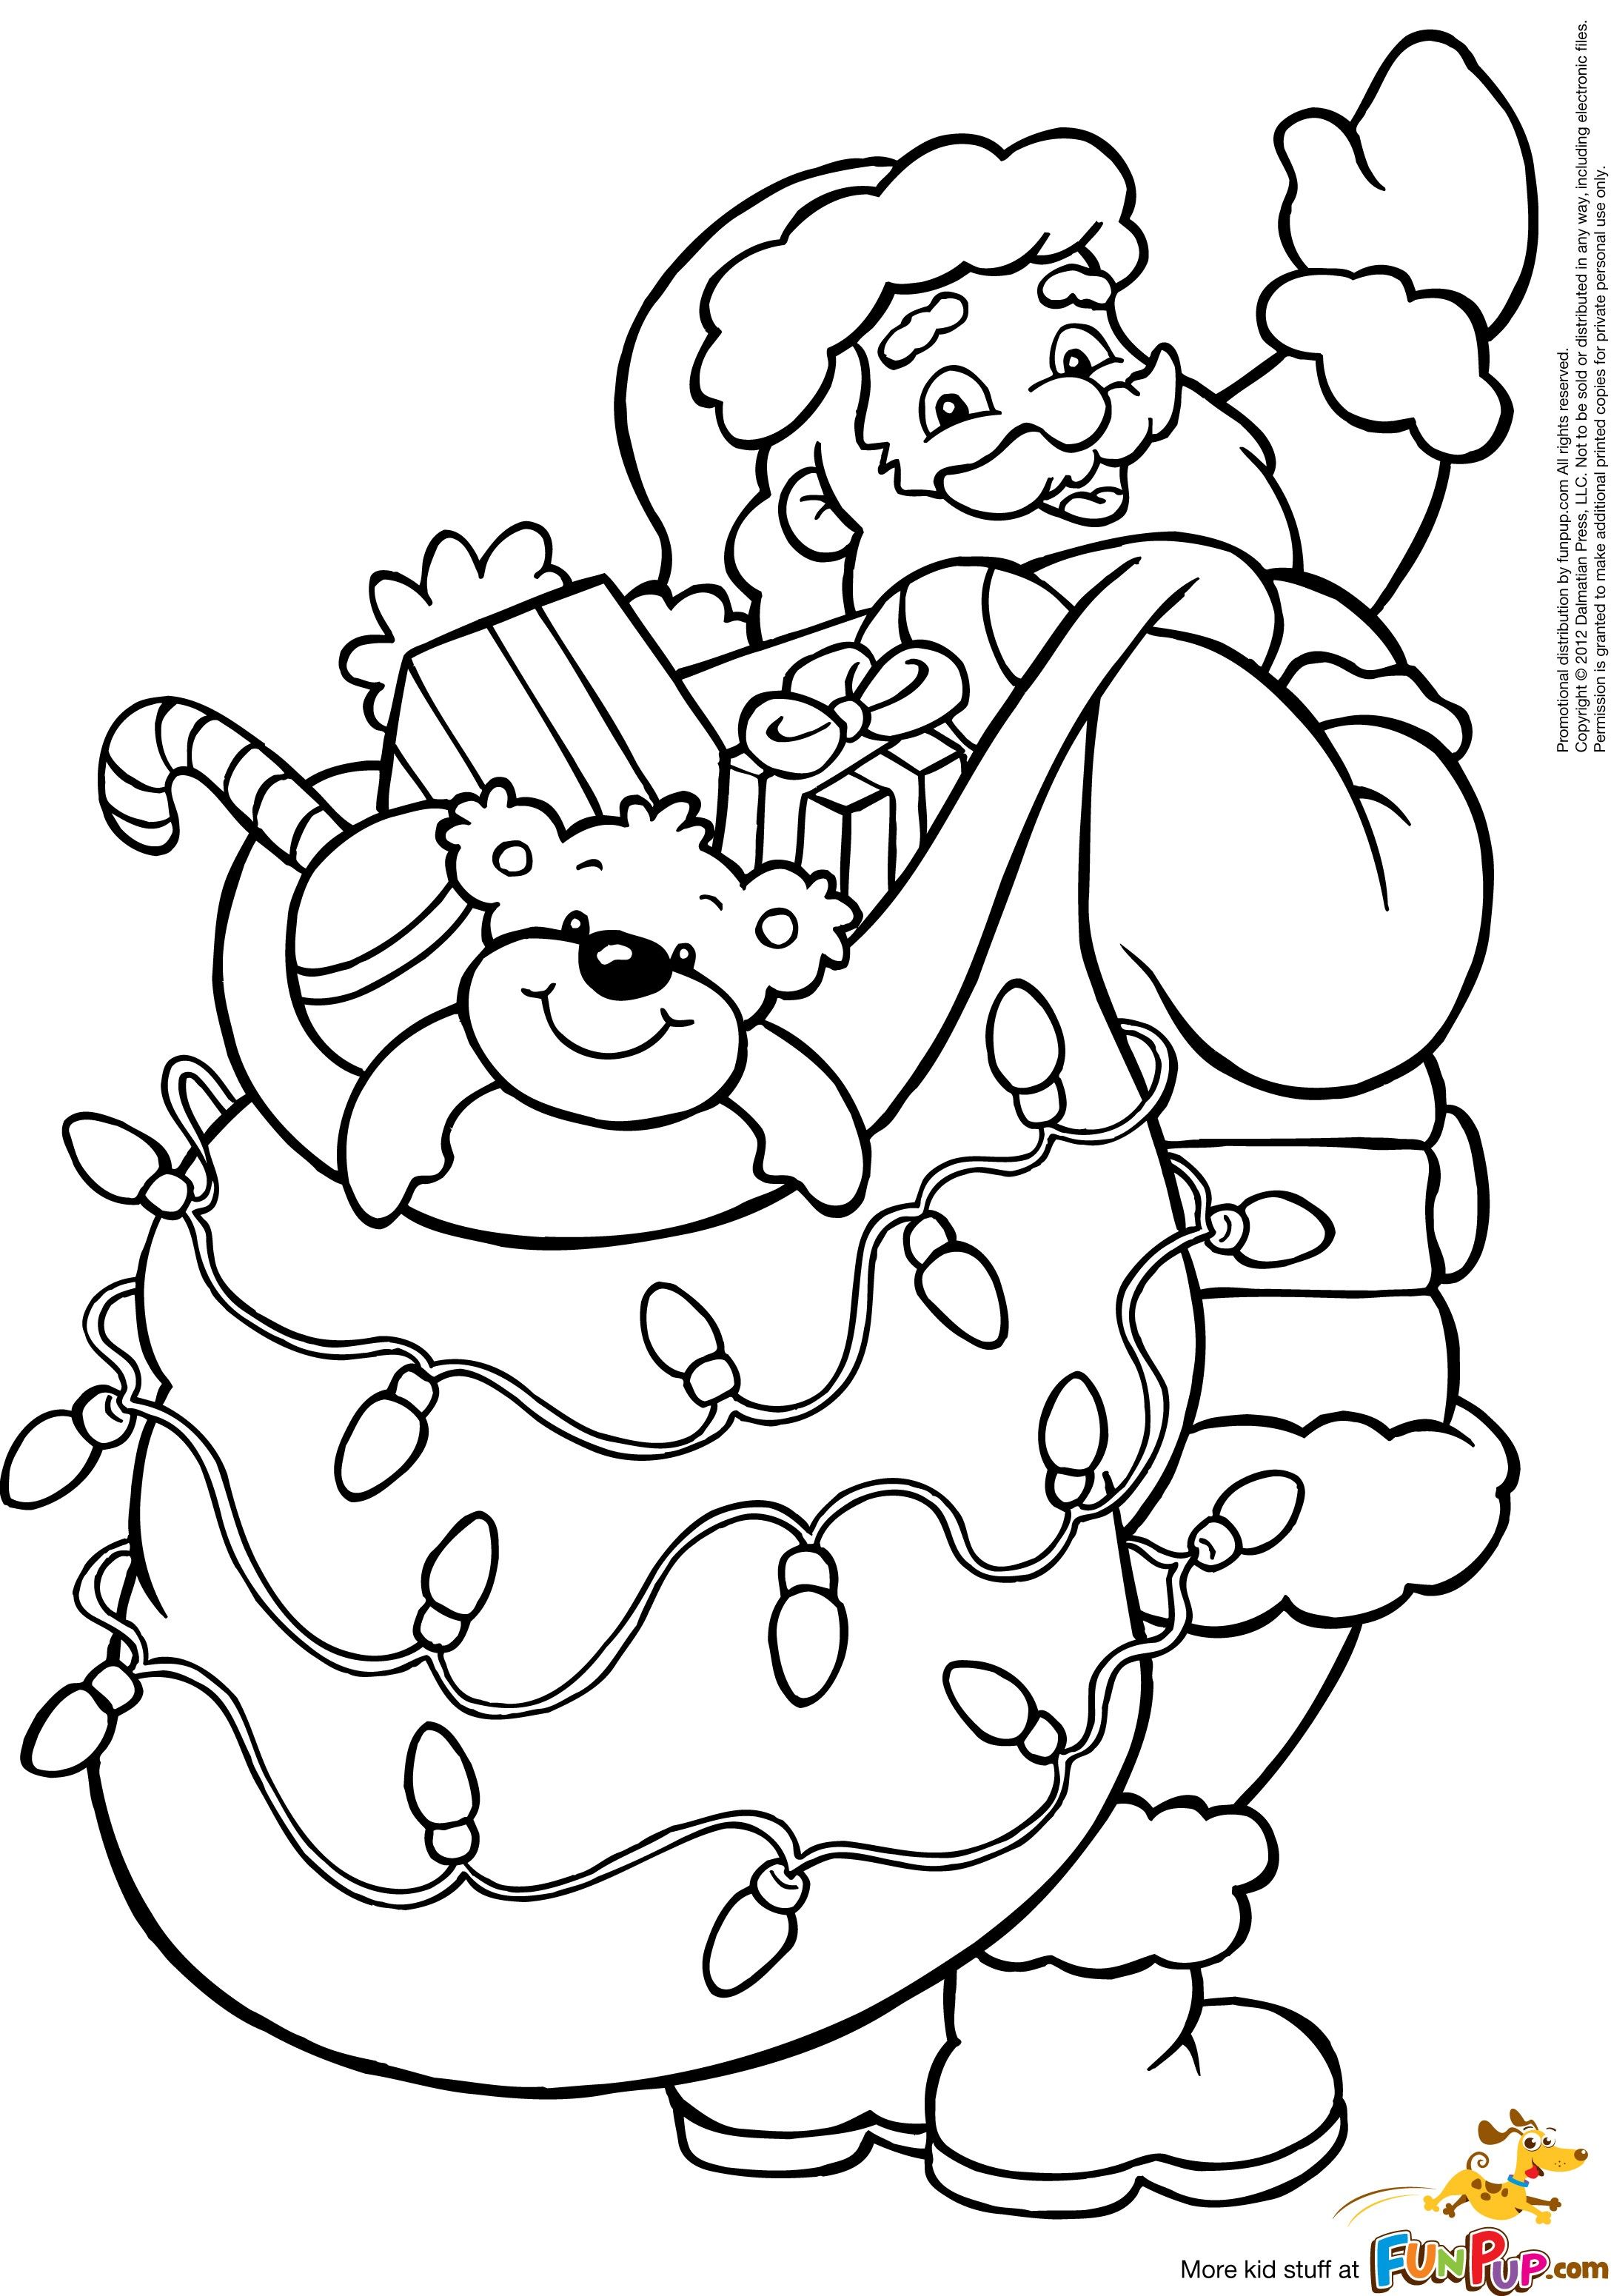 father-christmas-coloring-pages-at-getcolorings-free-printable-colorings-pages-to-print